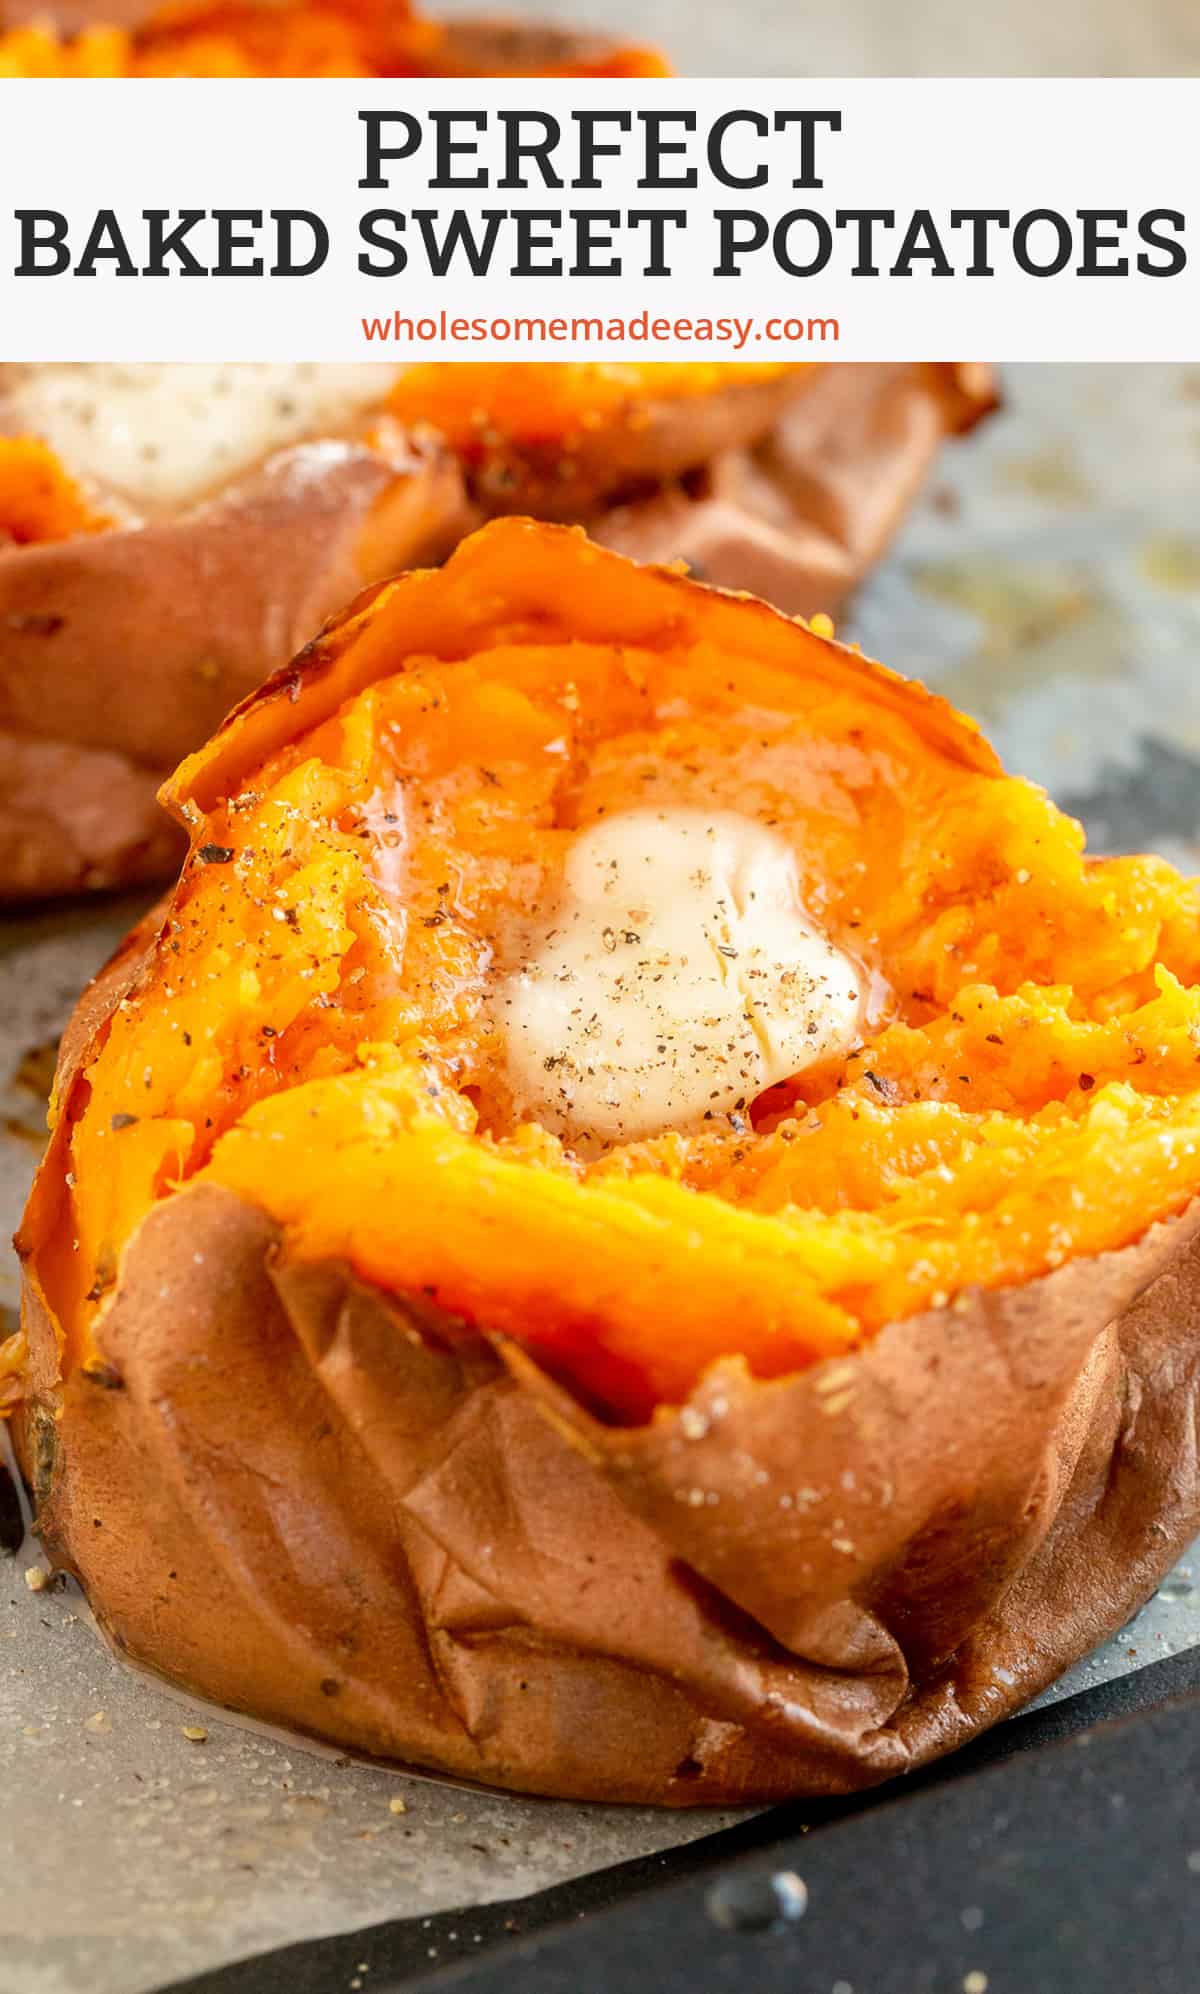 A close up of a baked sweet potato split open and topped with butter with text overlay.